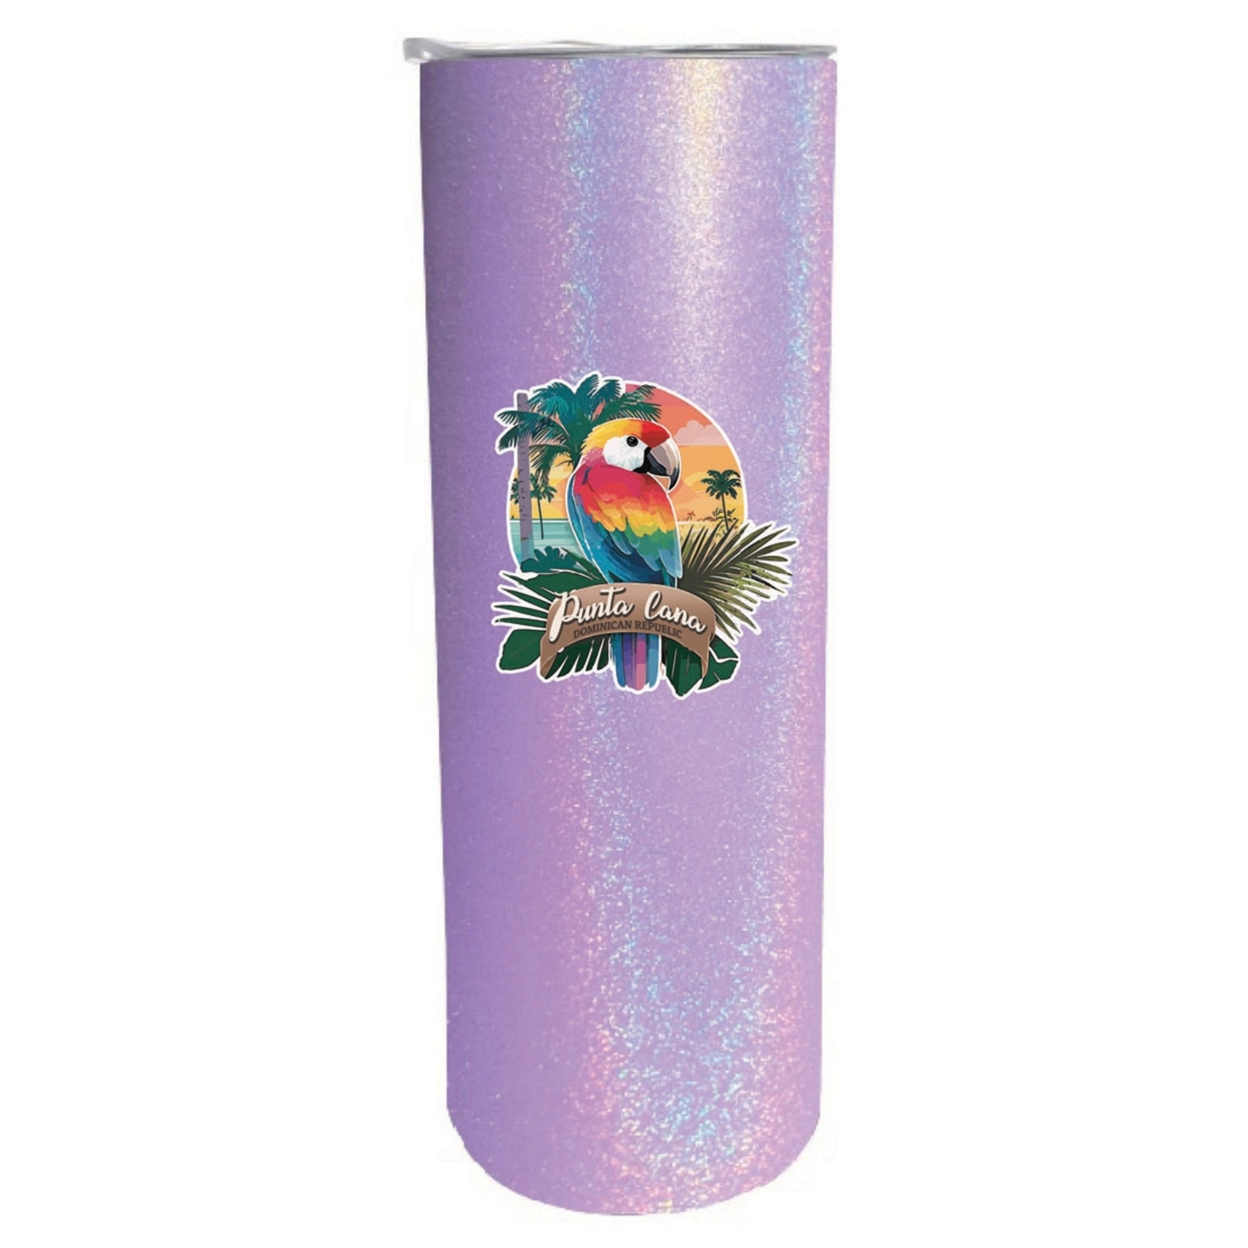 Punta Cana Dominican Republic Souvenir 20 Oz Insulated Stainless Steel Skinny Tumbler - Rainbow Glitter Purple, PARROT